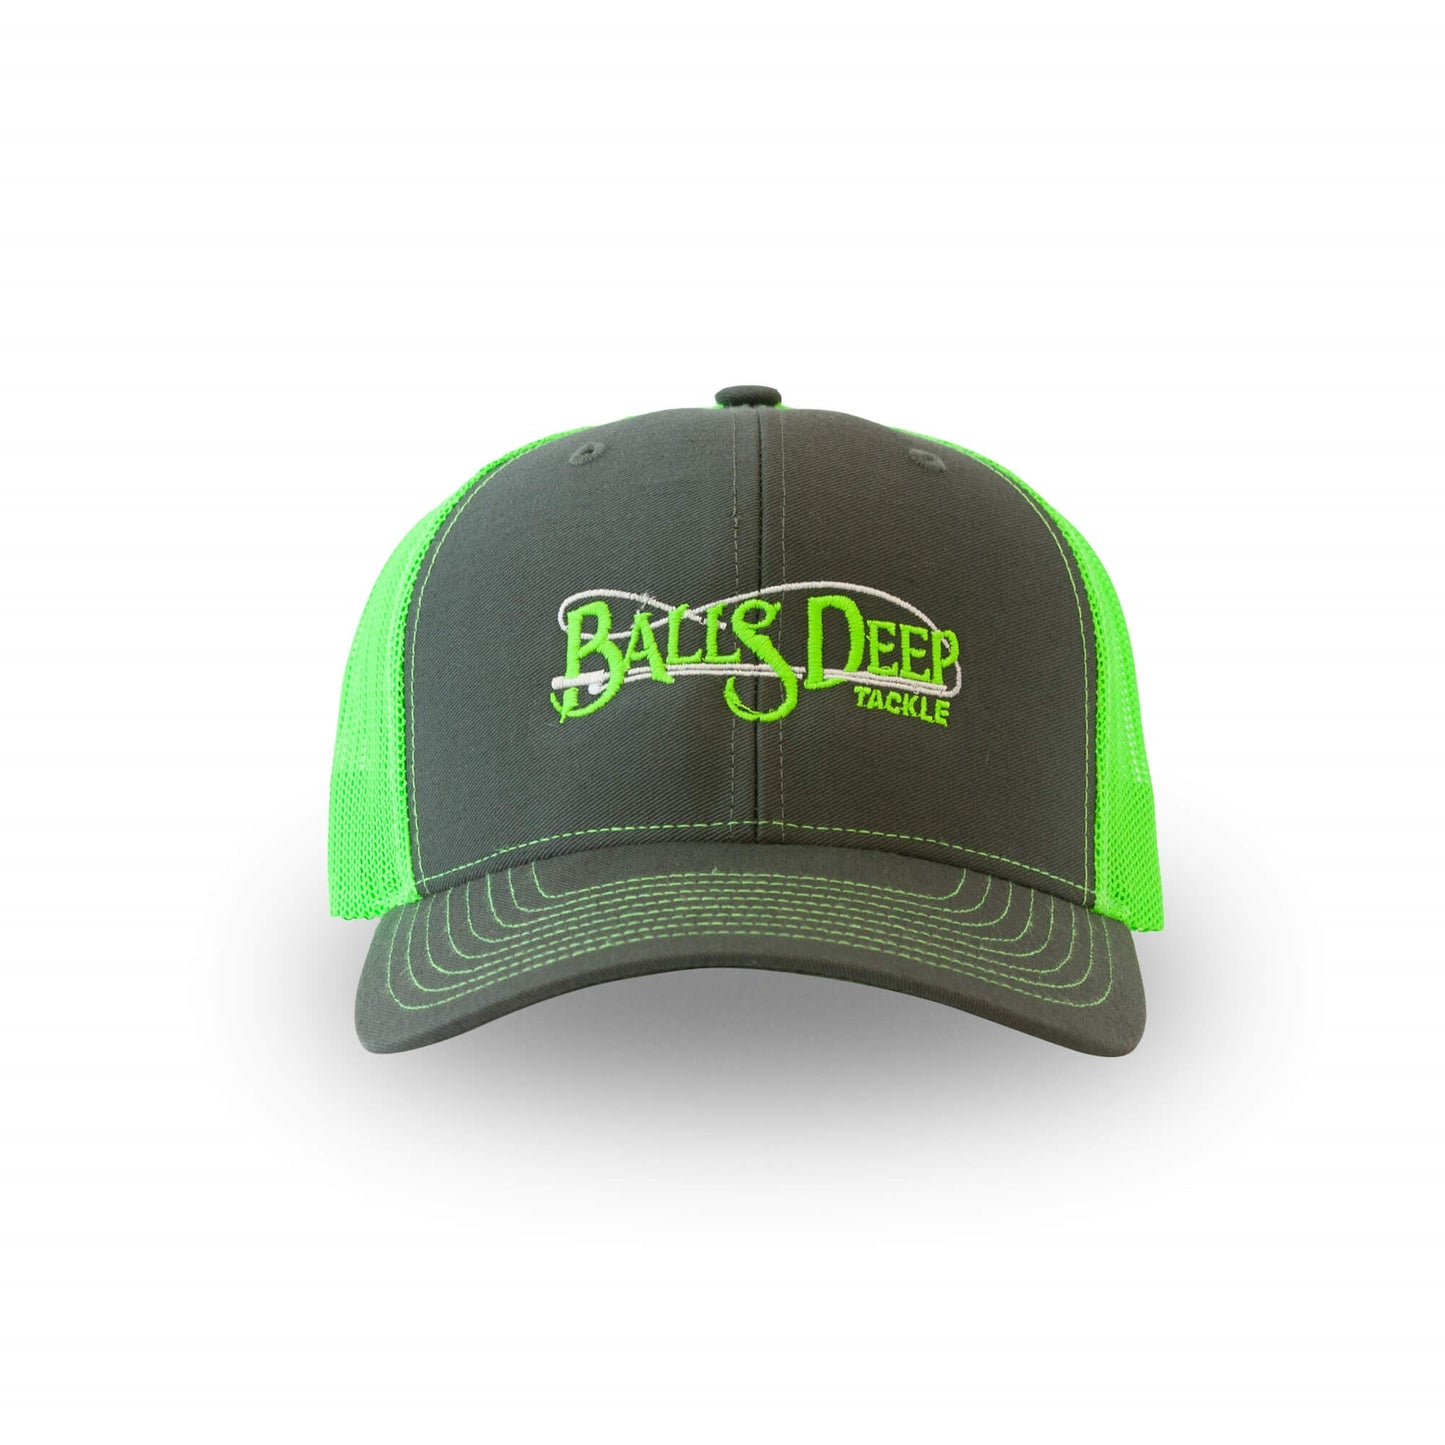 Limited Time - Free Sinkers with Every Hat